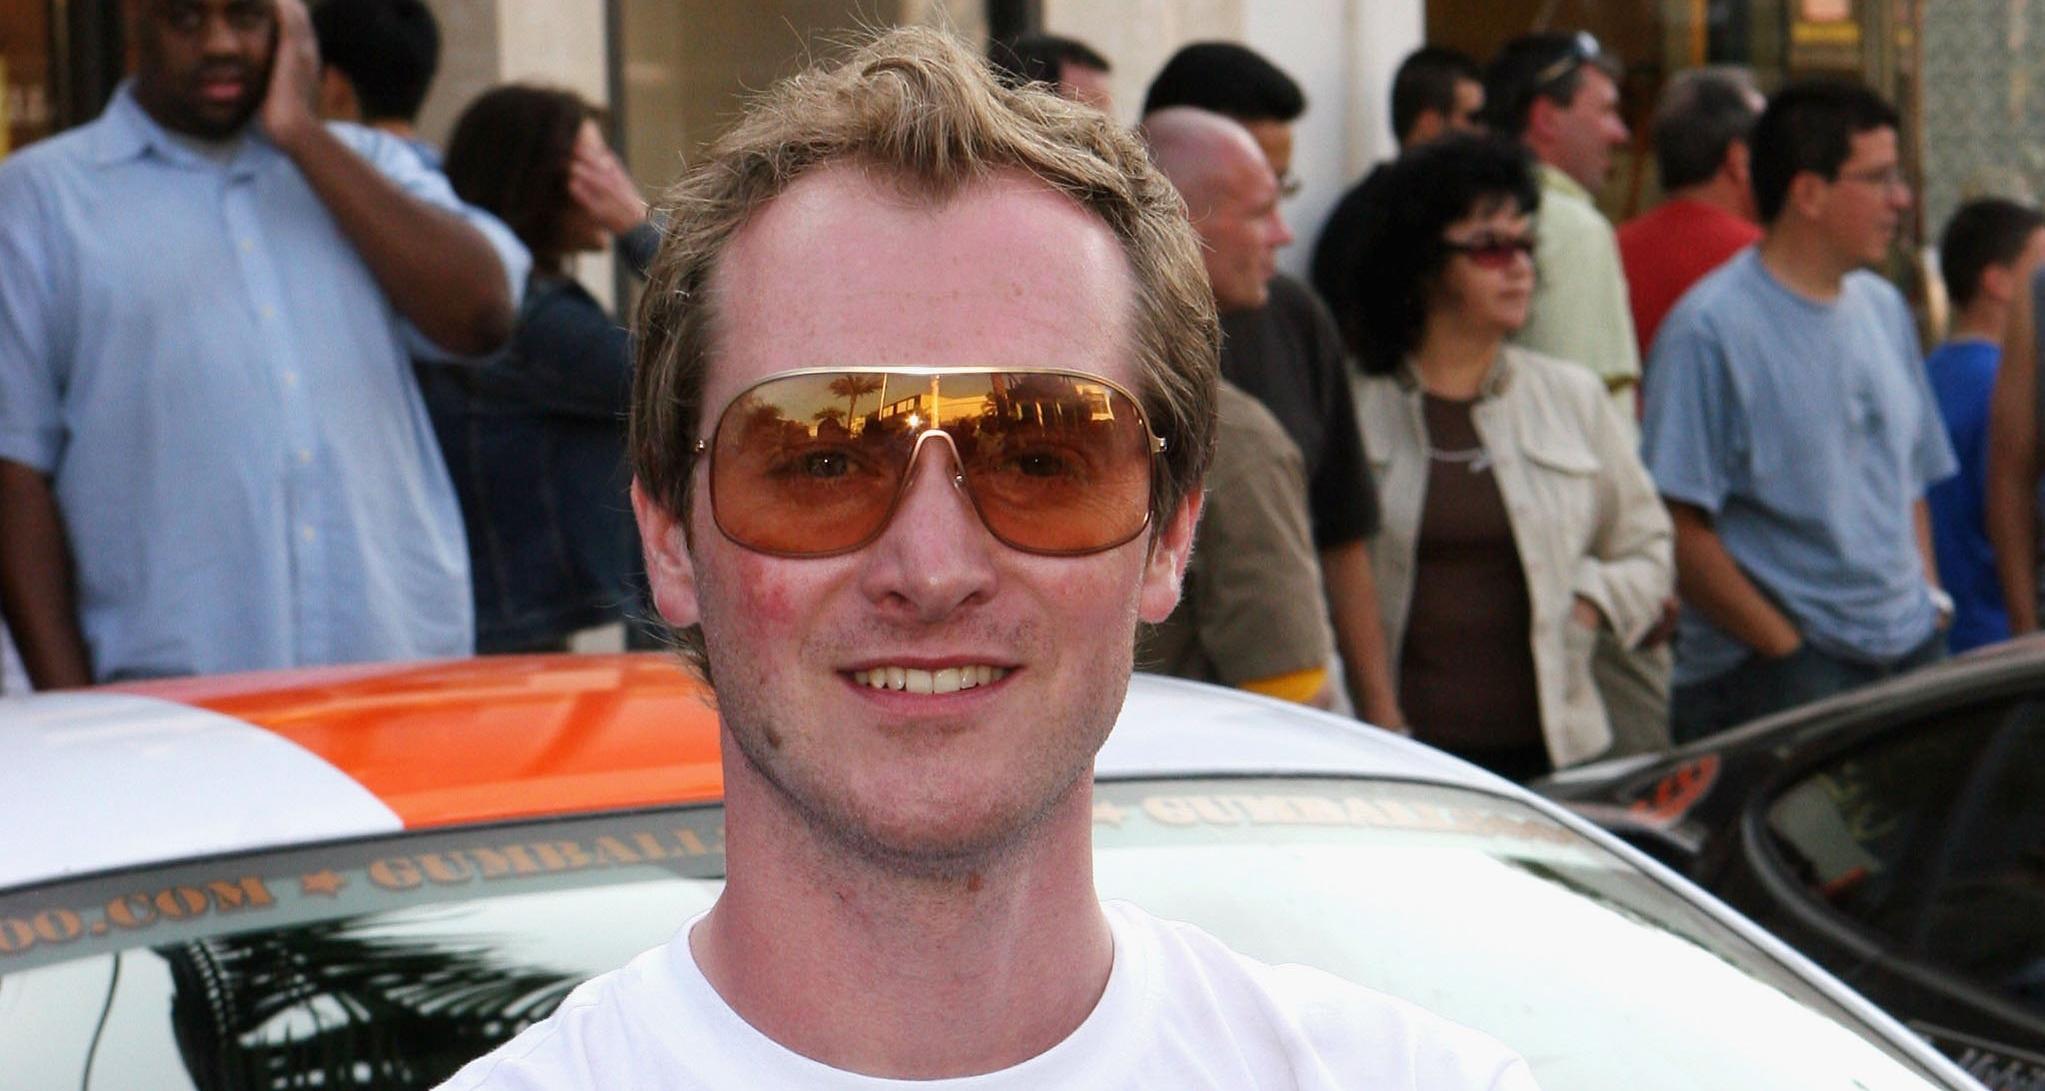 Gumball founder, Maximillion Cooper as the Gumball 3000 Rally comes to an end at the Rodeo Drive finish line on May 7, 2006 in Beverly Hills